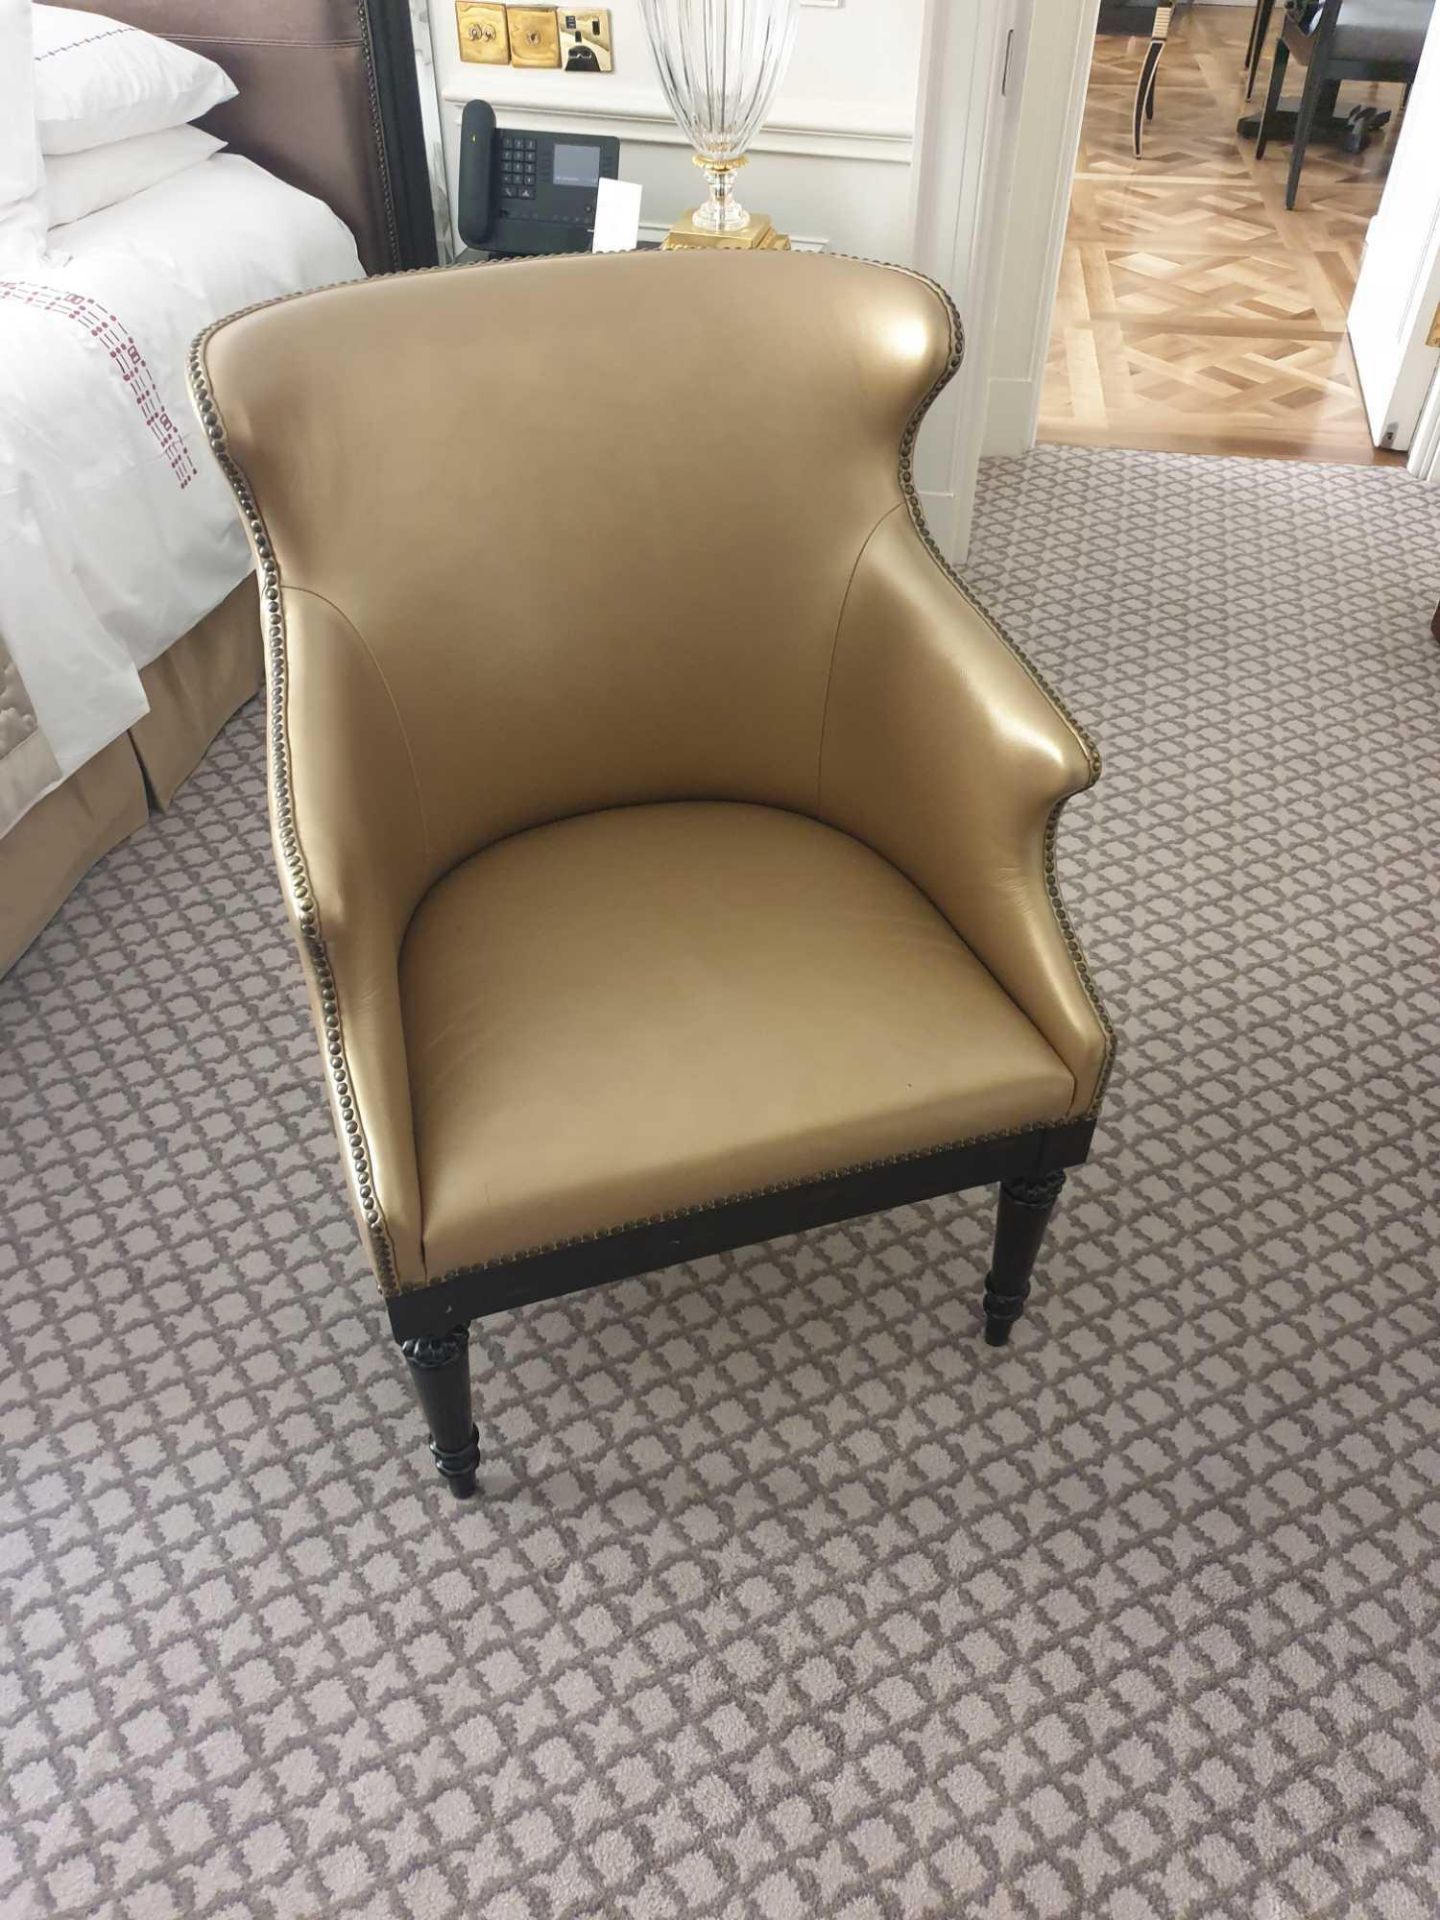 A Modern Wing Back Accent Chair Upholstered In Gold Leather With Pin Stud Detail On Dark Solid - Bild 2 aus 2